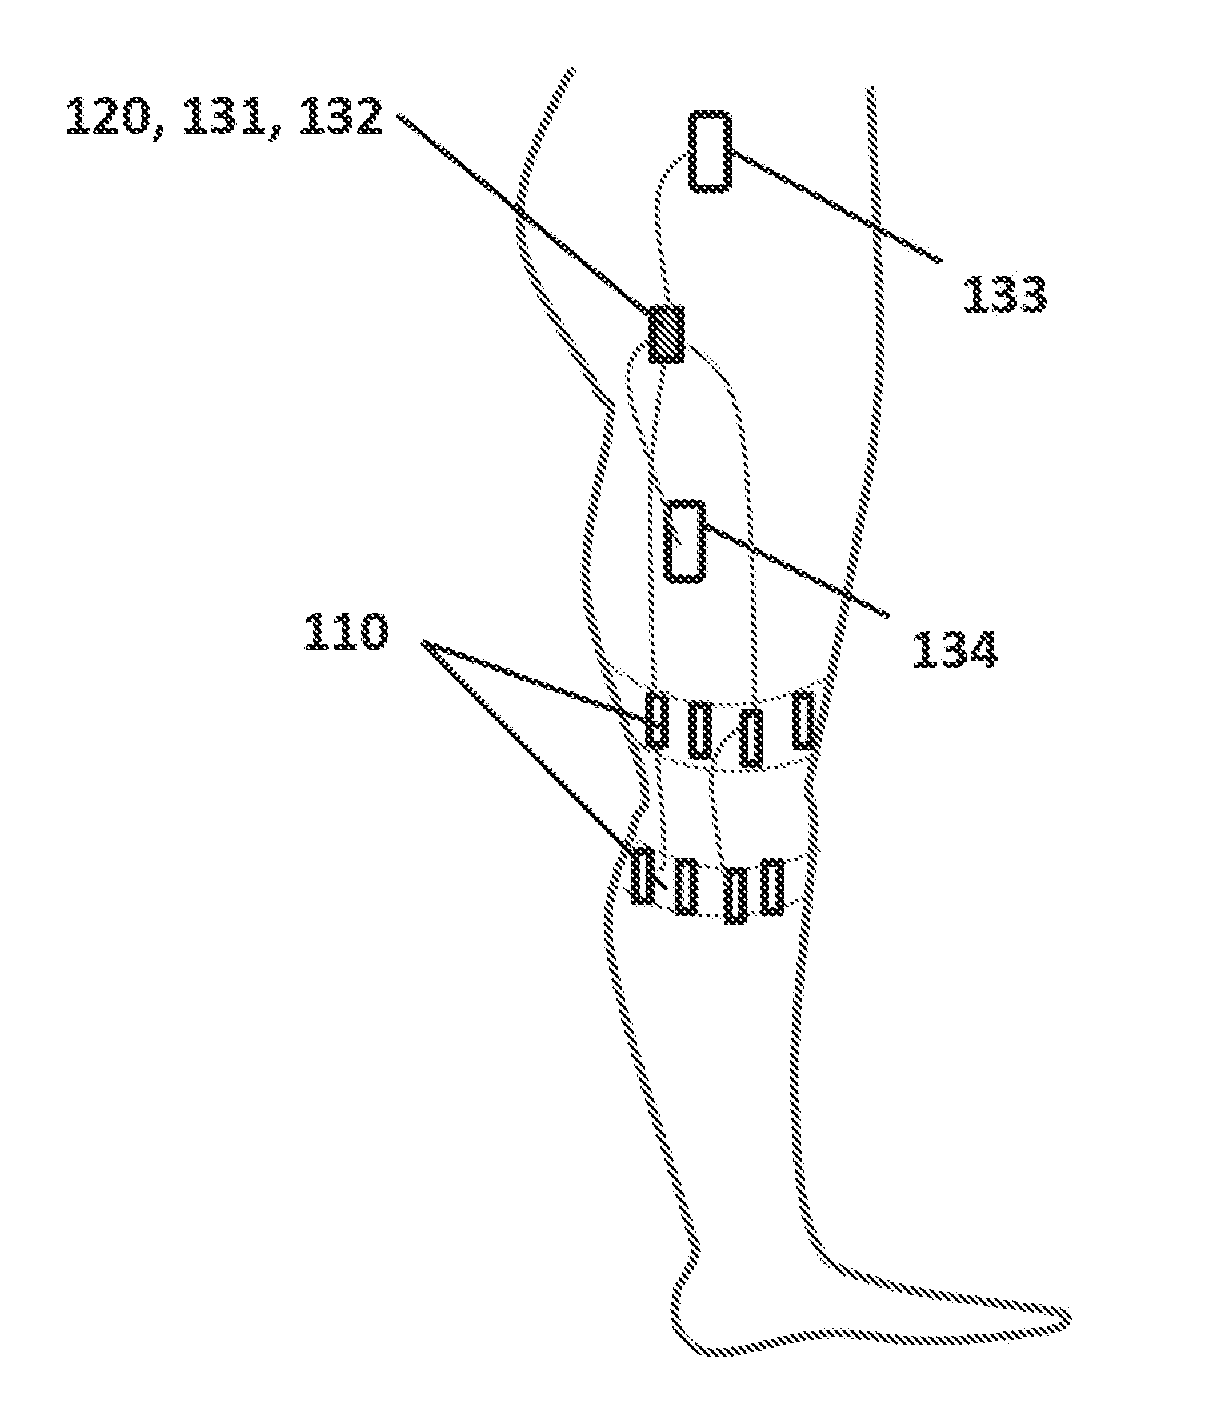 Device and methods for preventing knee sprain injuries